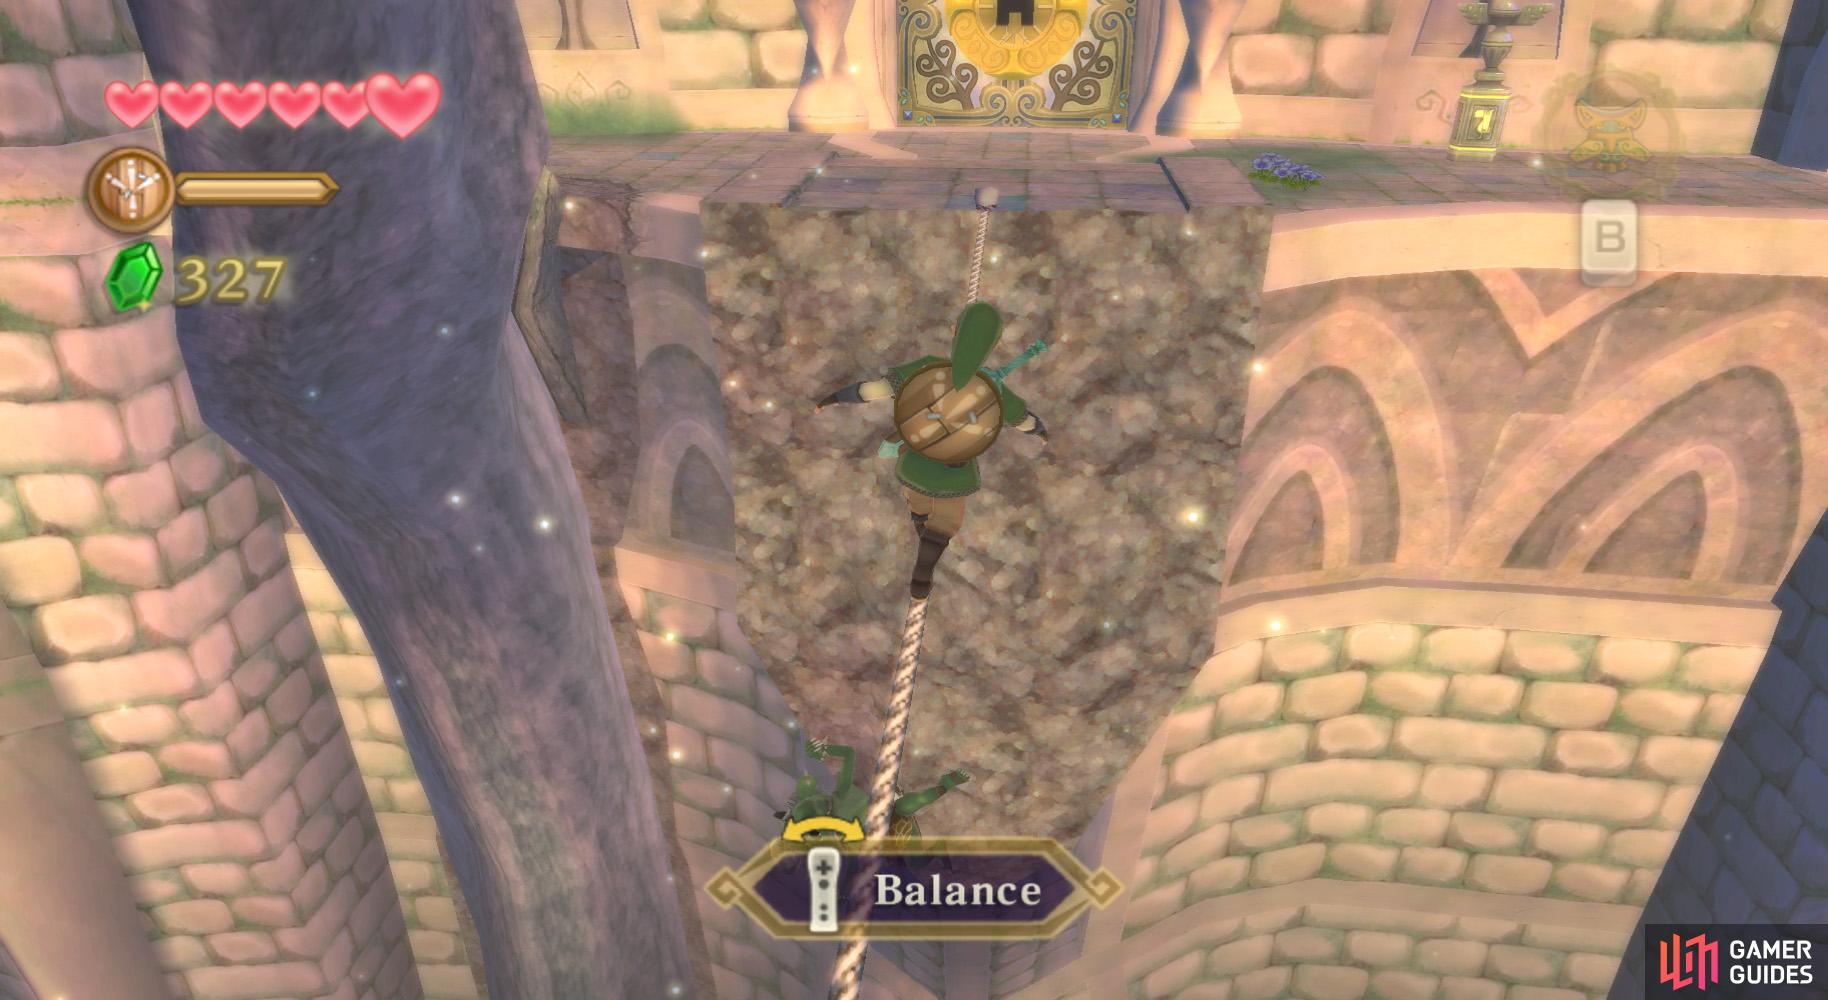 Wobble the rope to send the Bokoblins into the abyss.